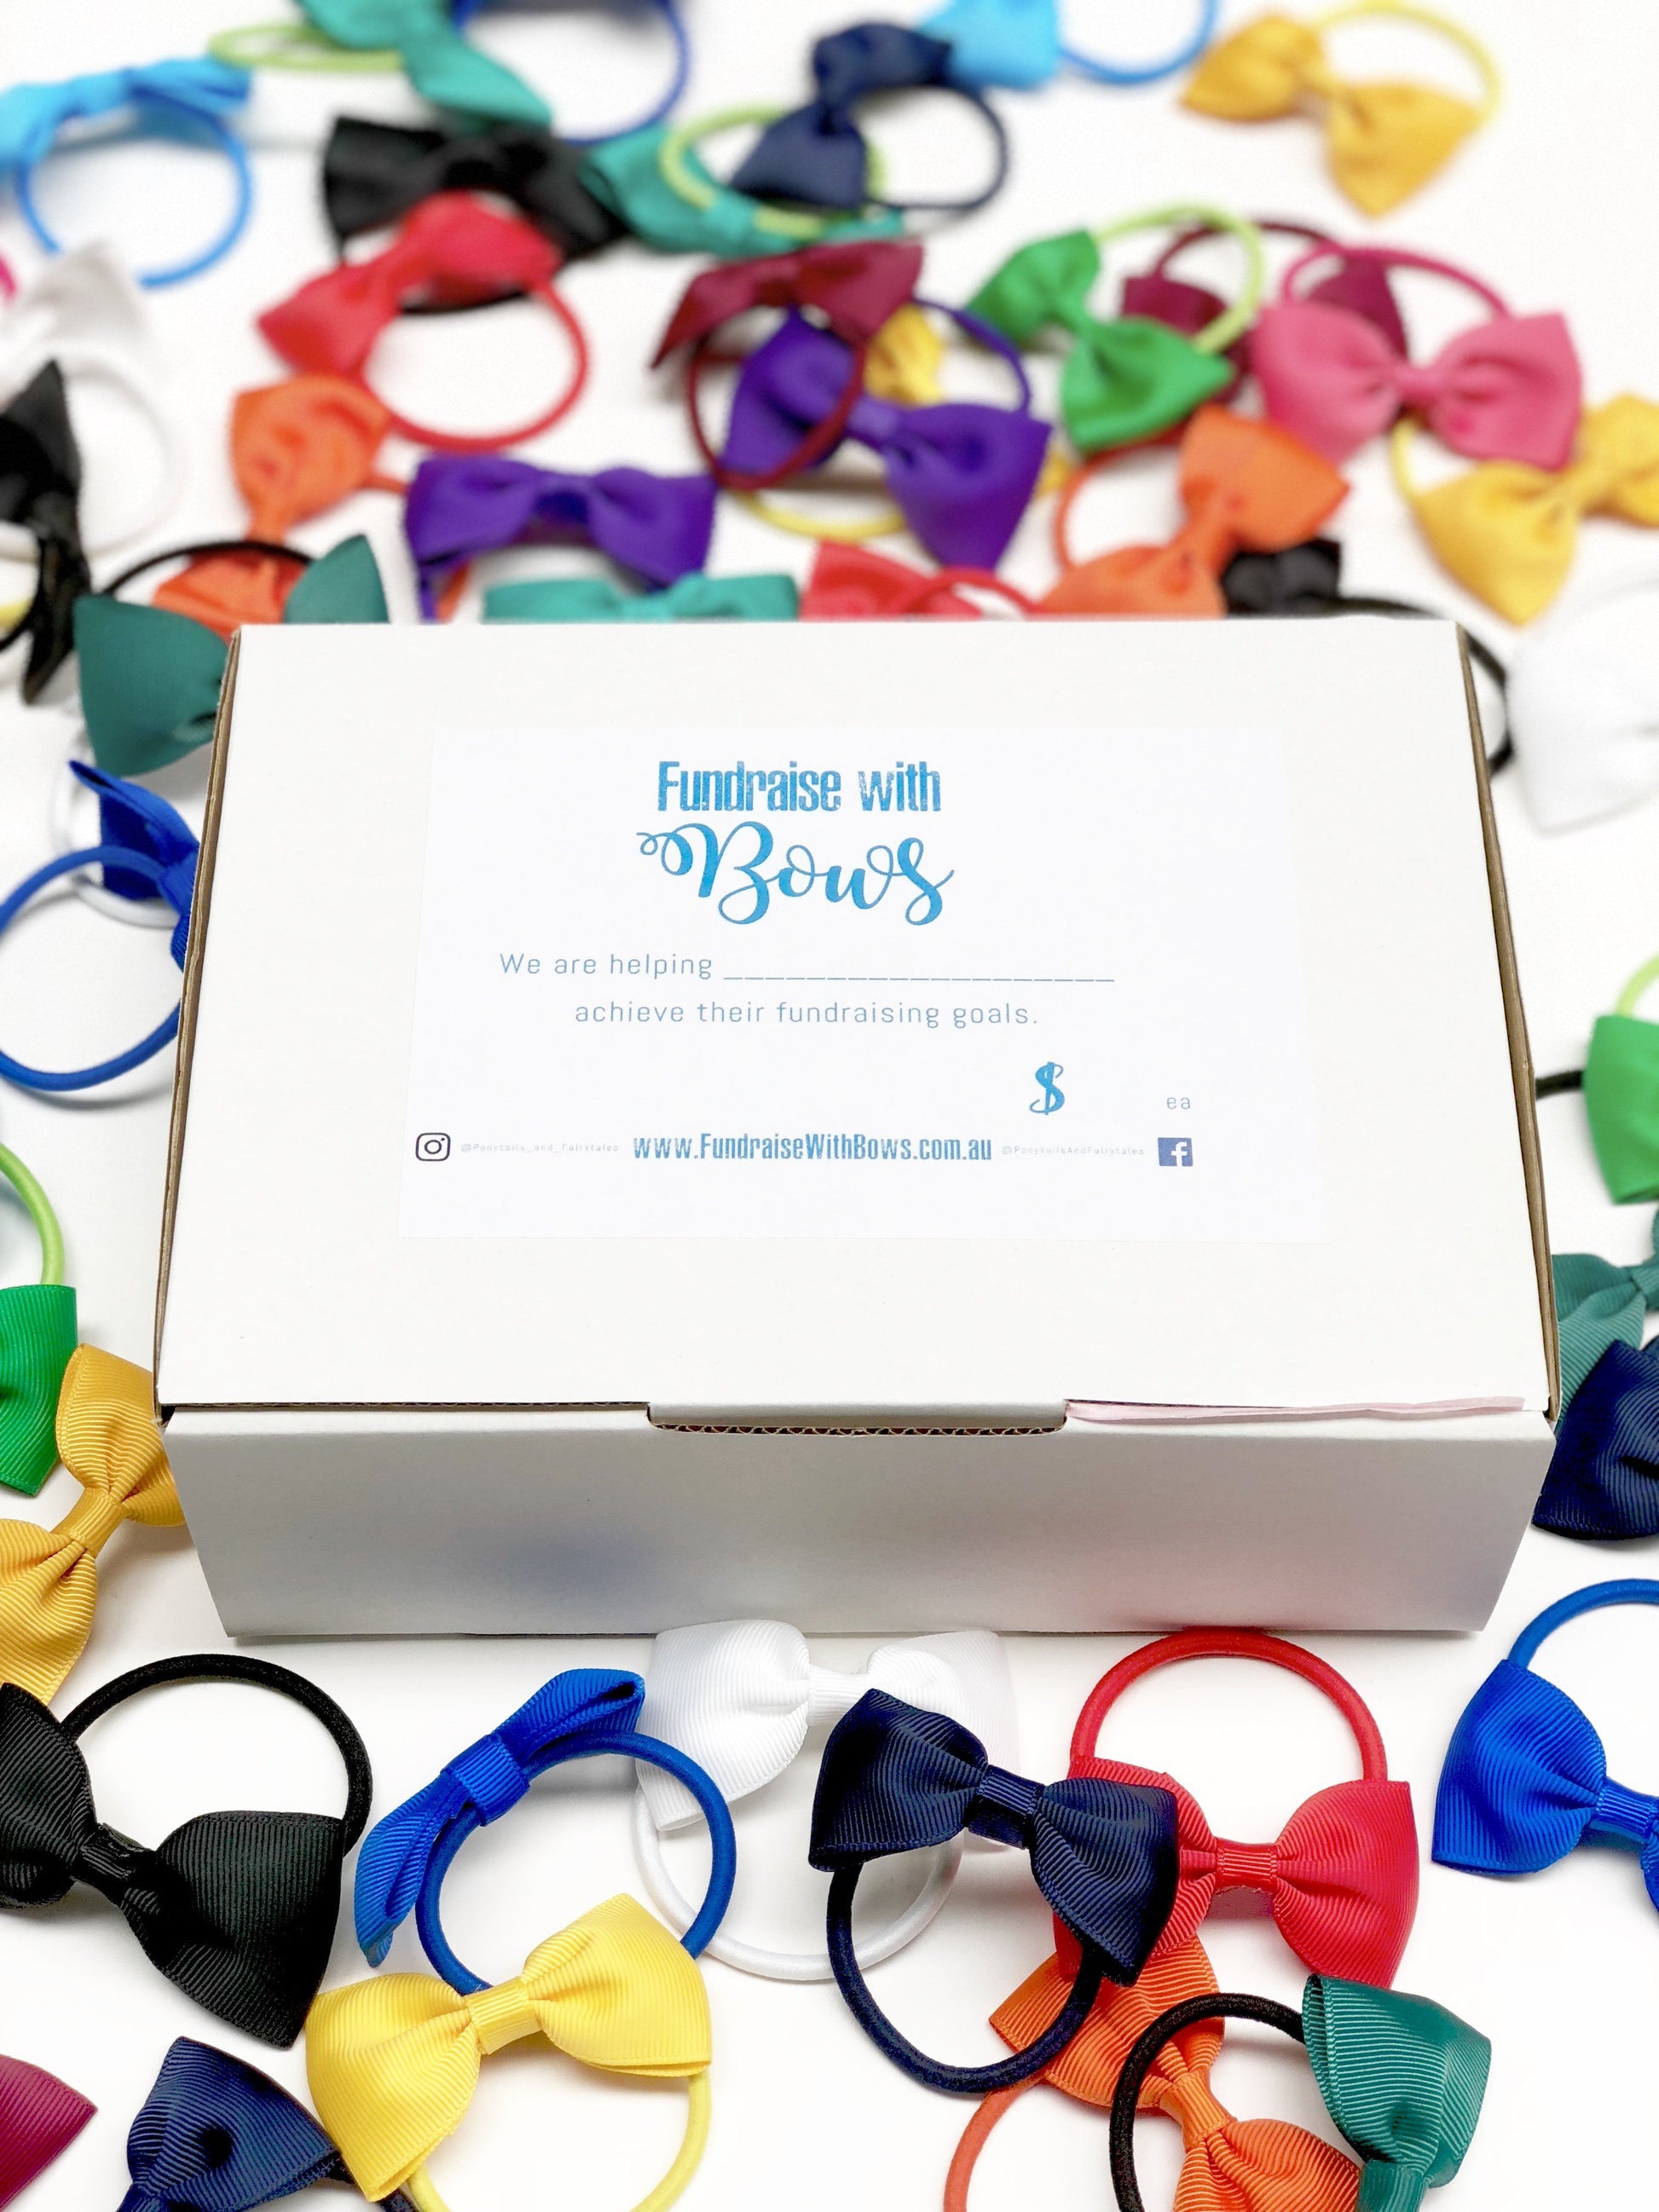 Fundraise with Bows - Fundraising Box (50pc) - Ponytails and Fairytales